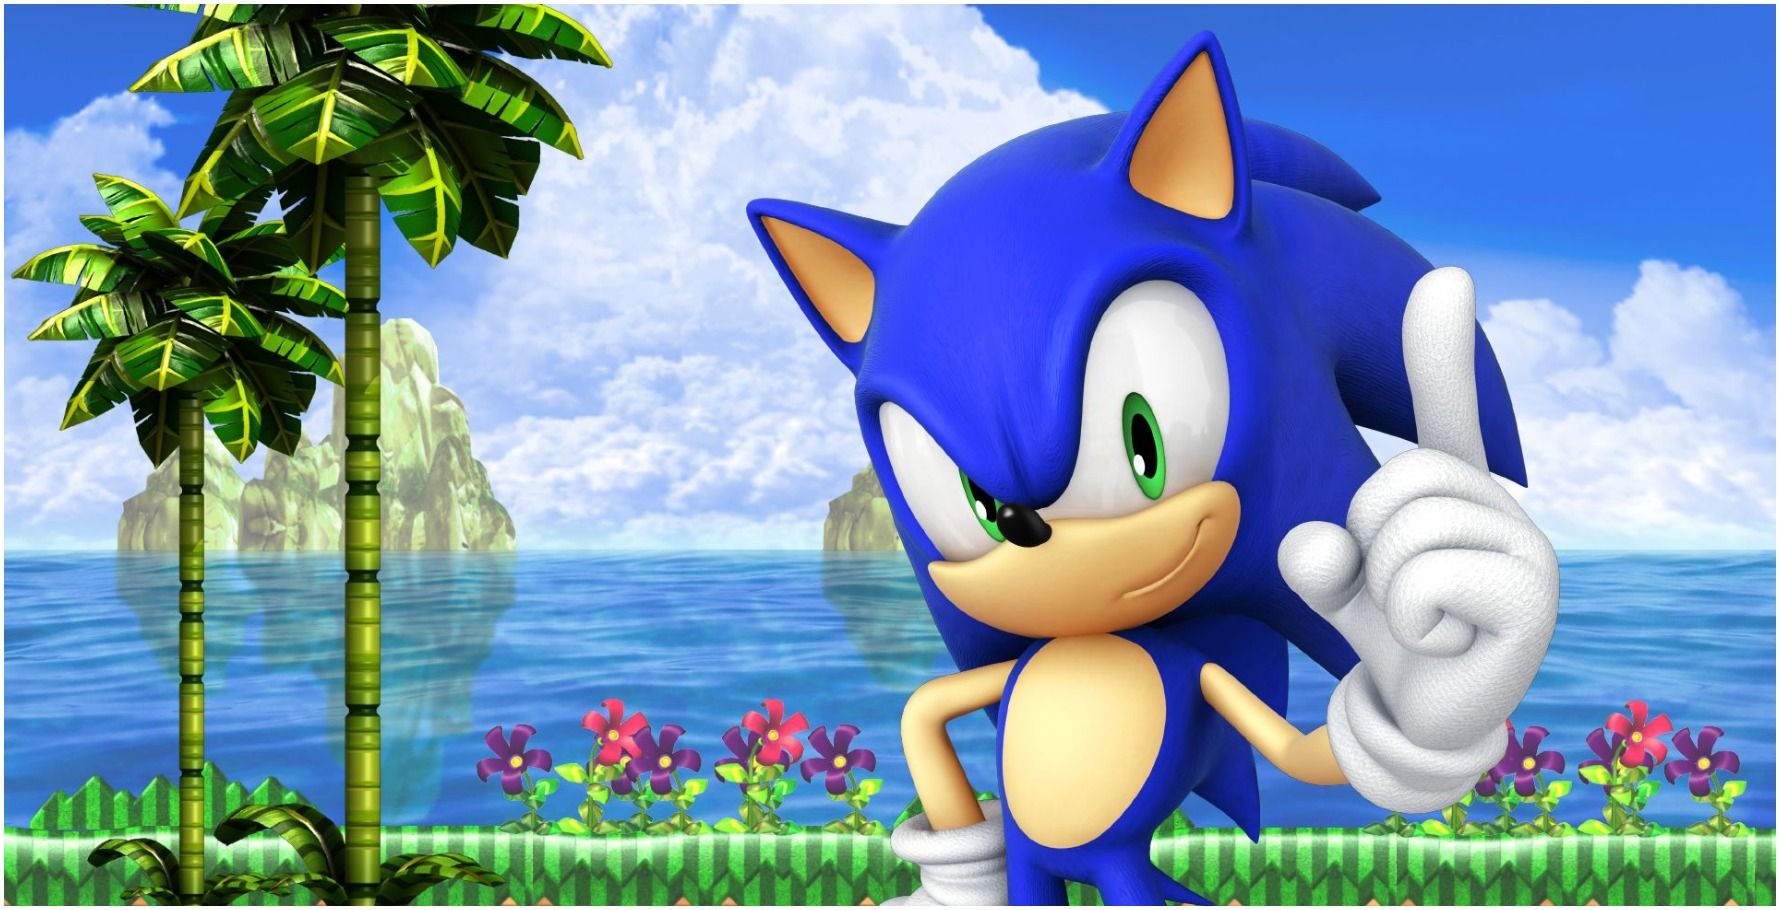 sonic the hedgehog new game 2019